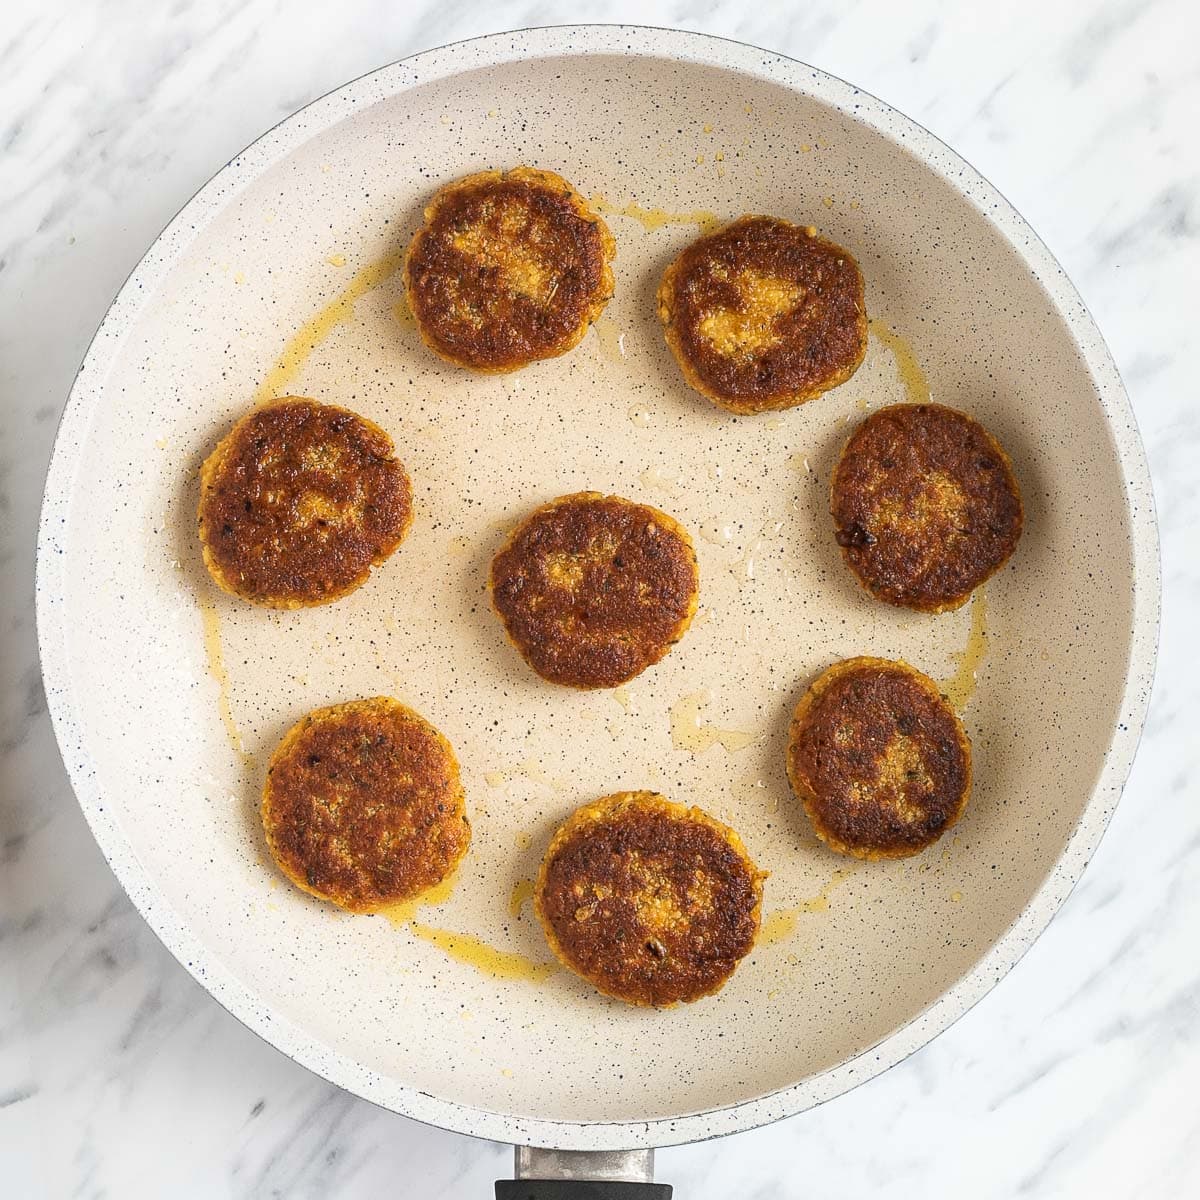 A white frying pan with crispy brown round sausage patties.